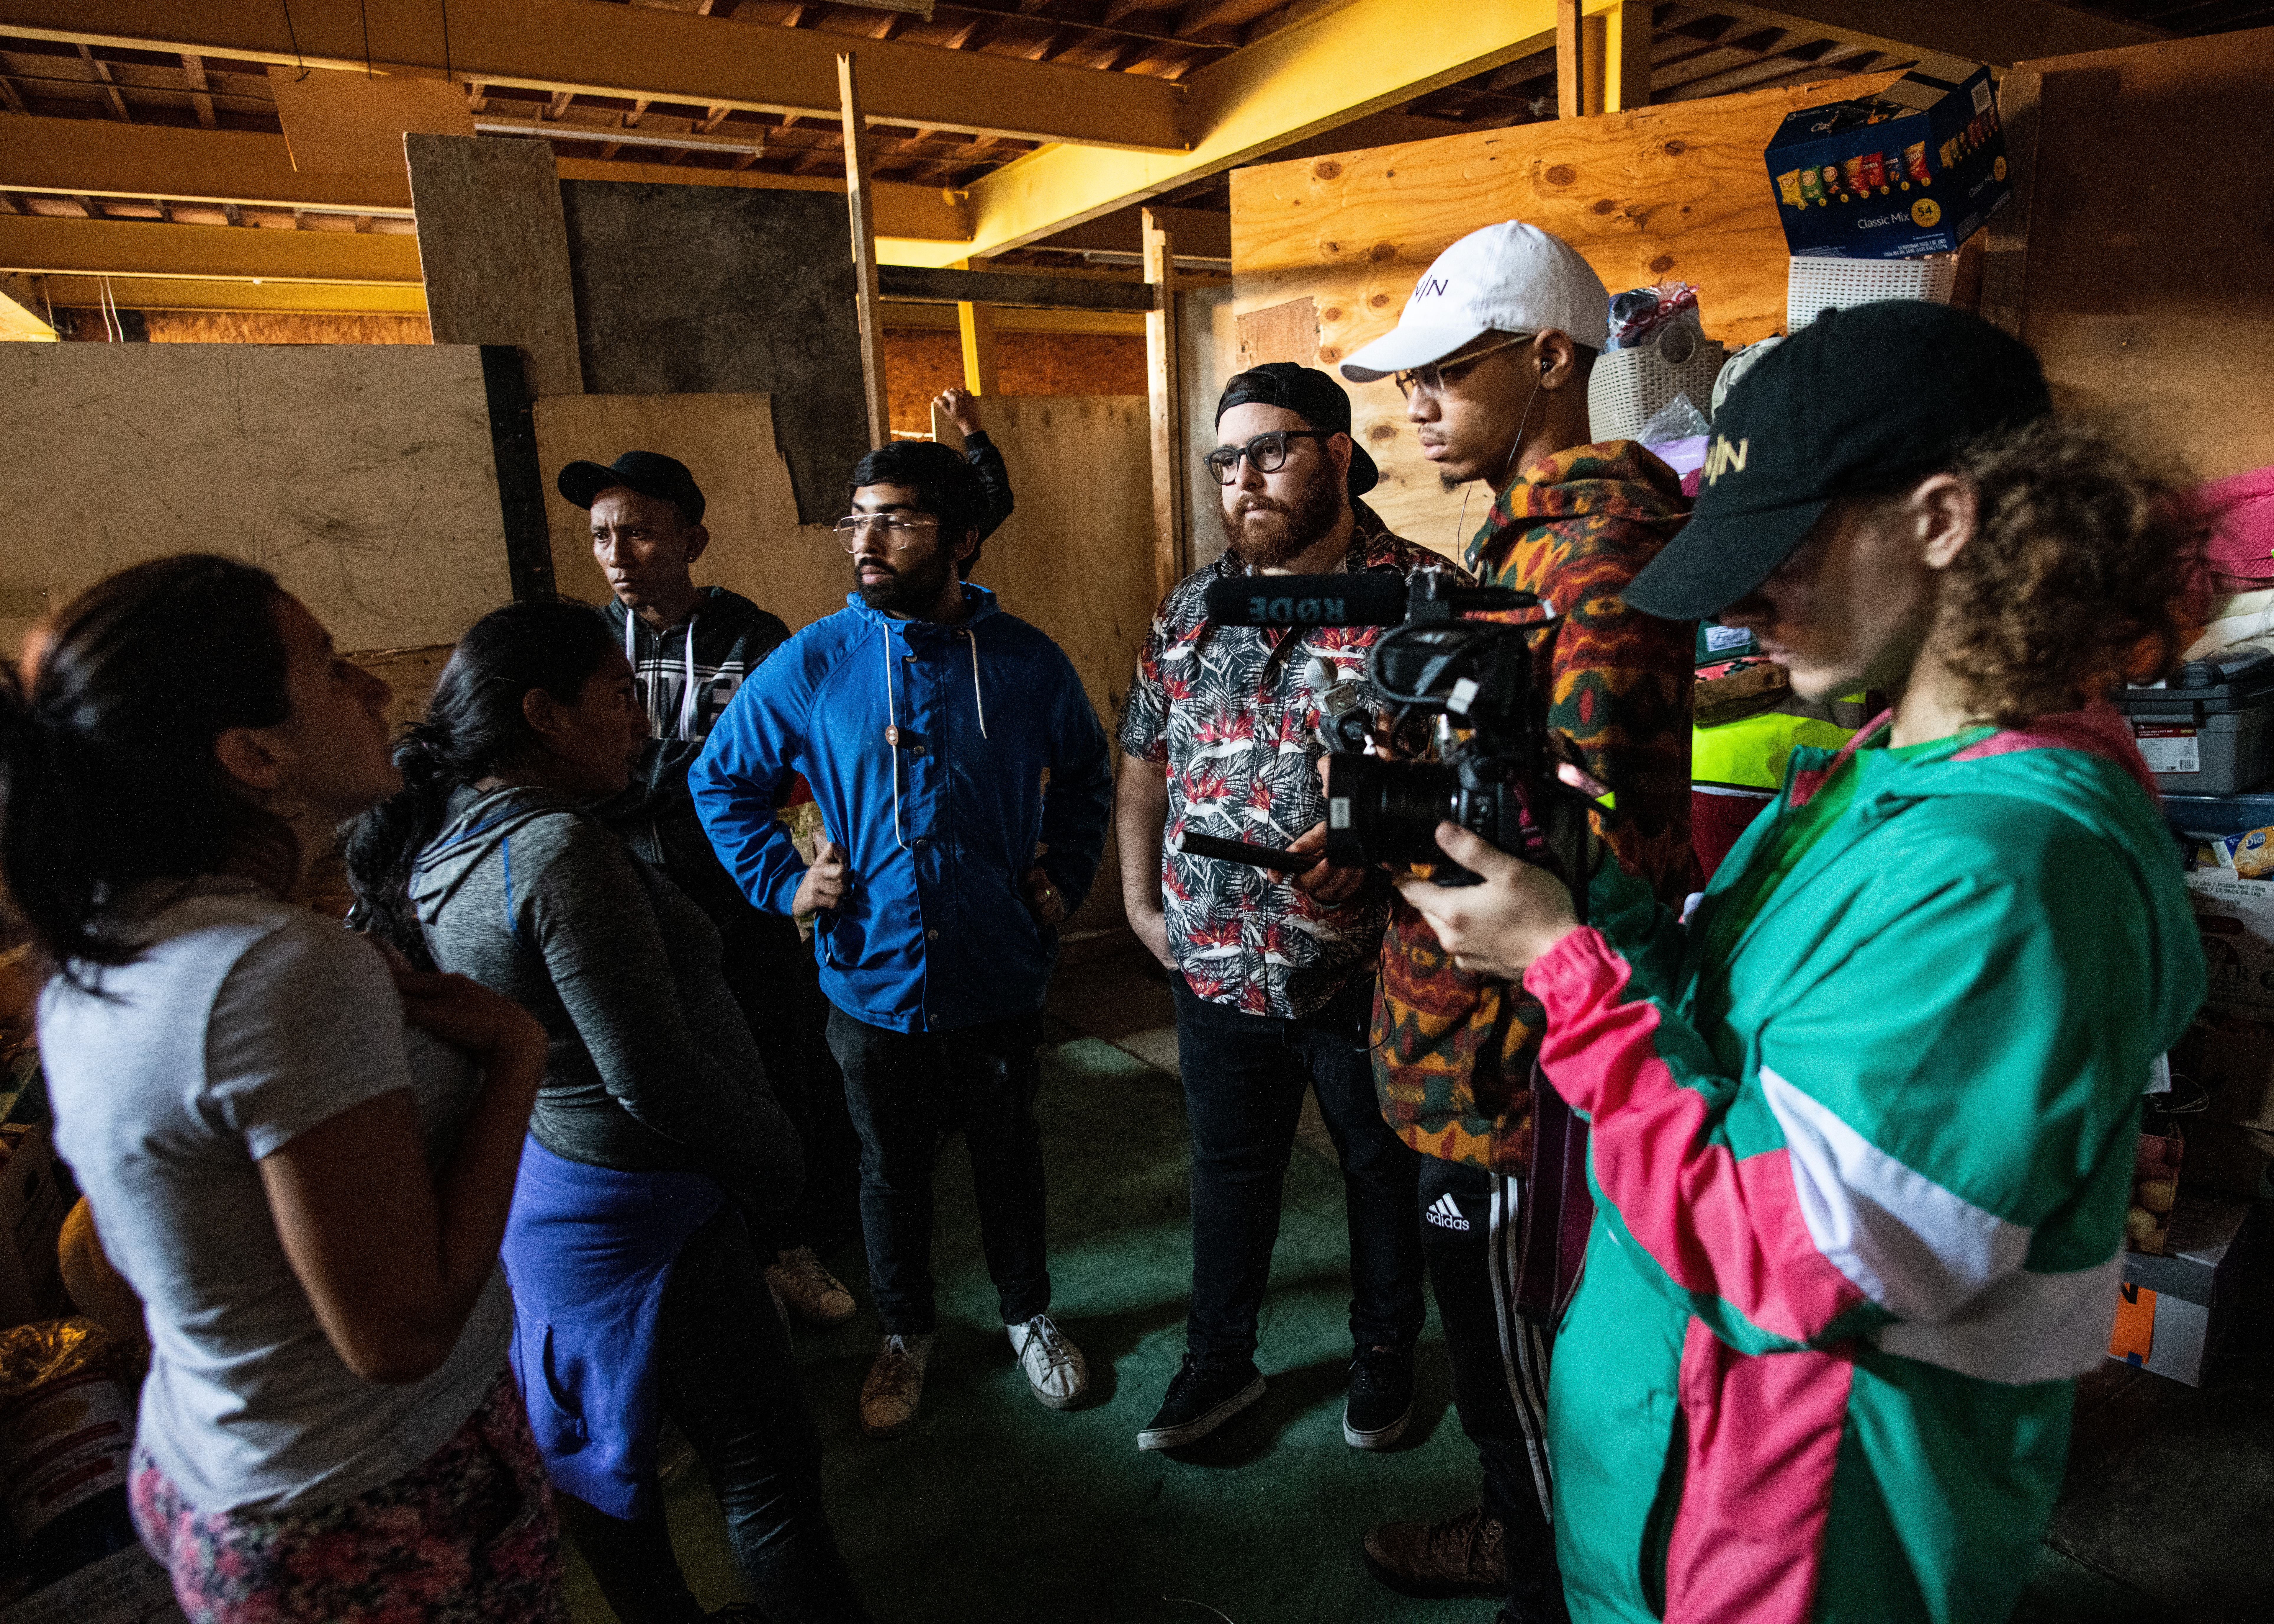 Kian Kelley-Chung ’20 (second from right) Interviews Brenda (far left) and her aunt Leticia (second from left), two migrants from Honduras who volunteer in the pantry and kitchen of "Contra Viento y Marea," a migrant-run shelter in Tijuana, Mexico, where they also live. Dec. 20, 2018 (Photo by Paul Lai).